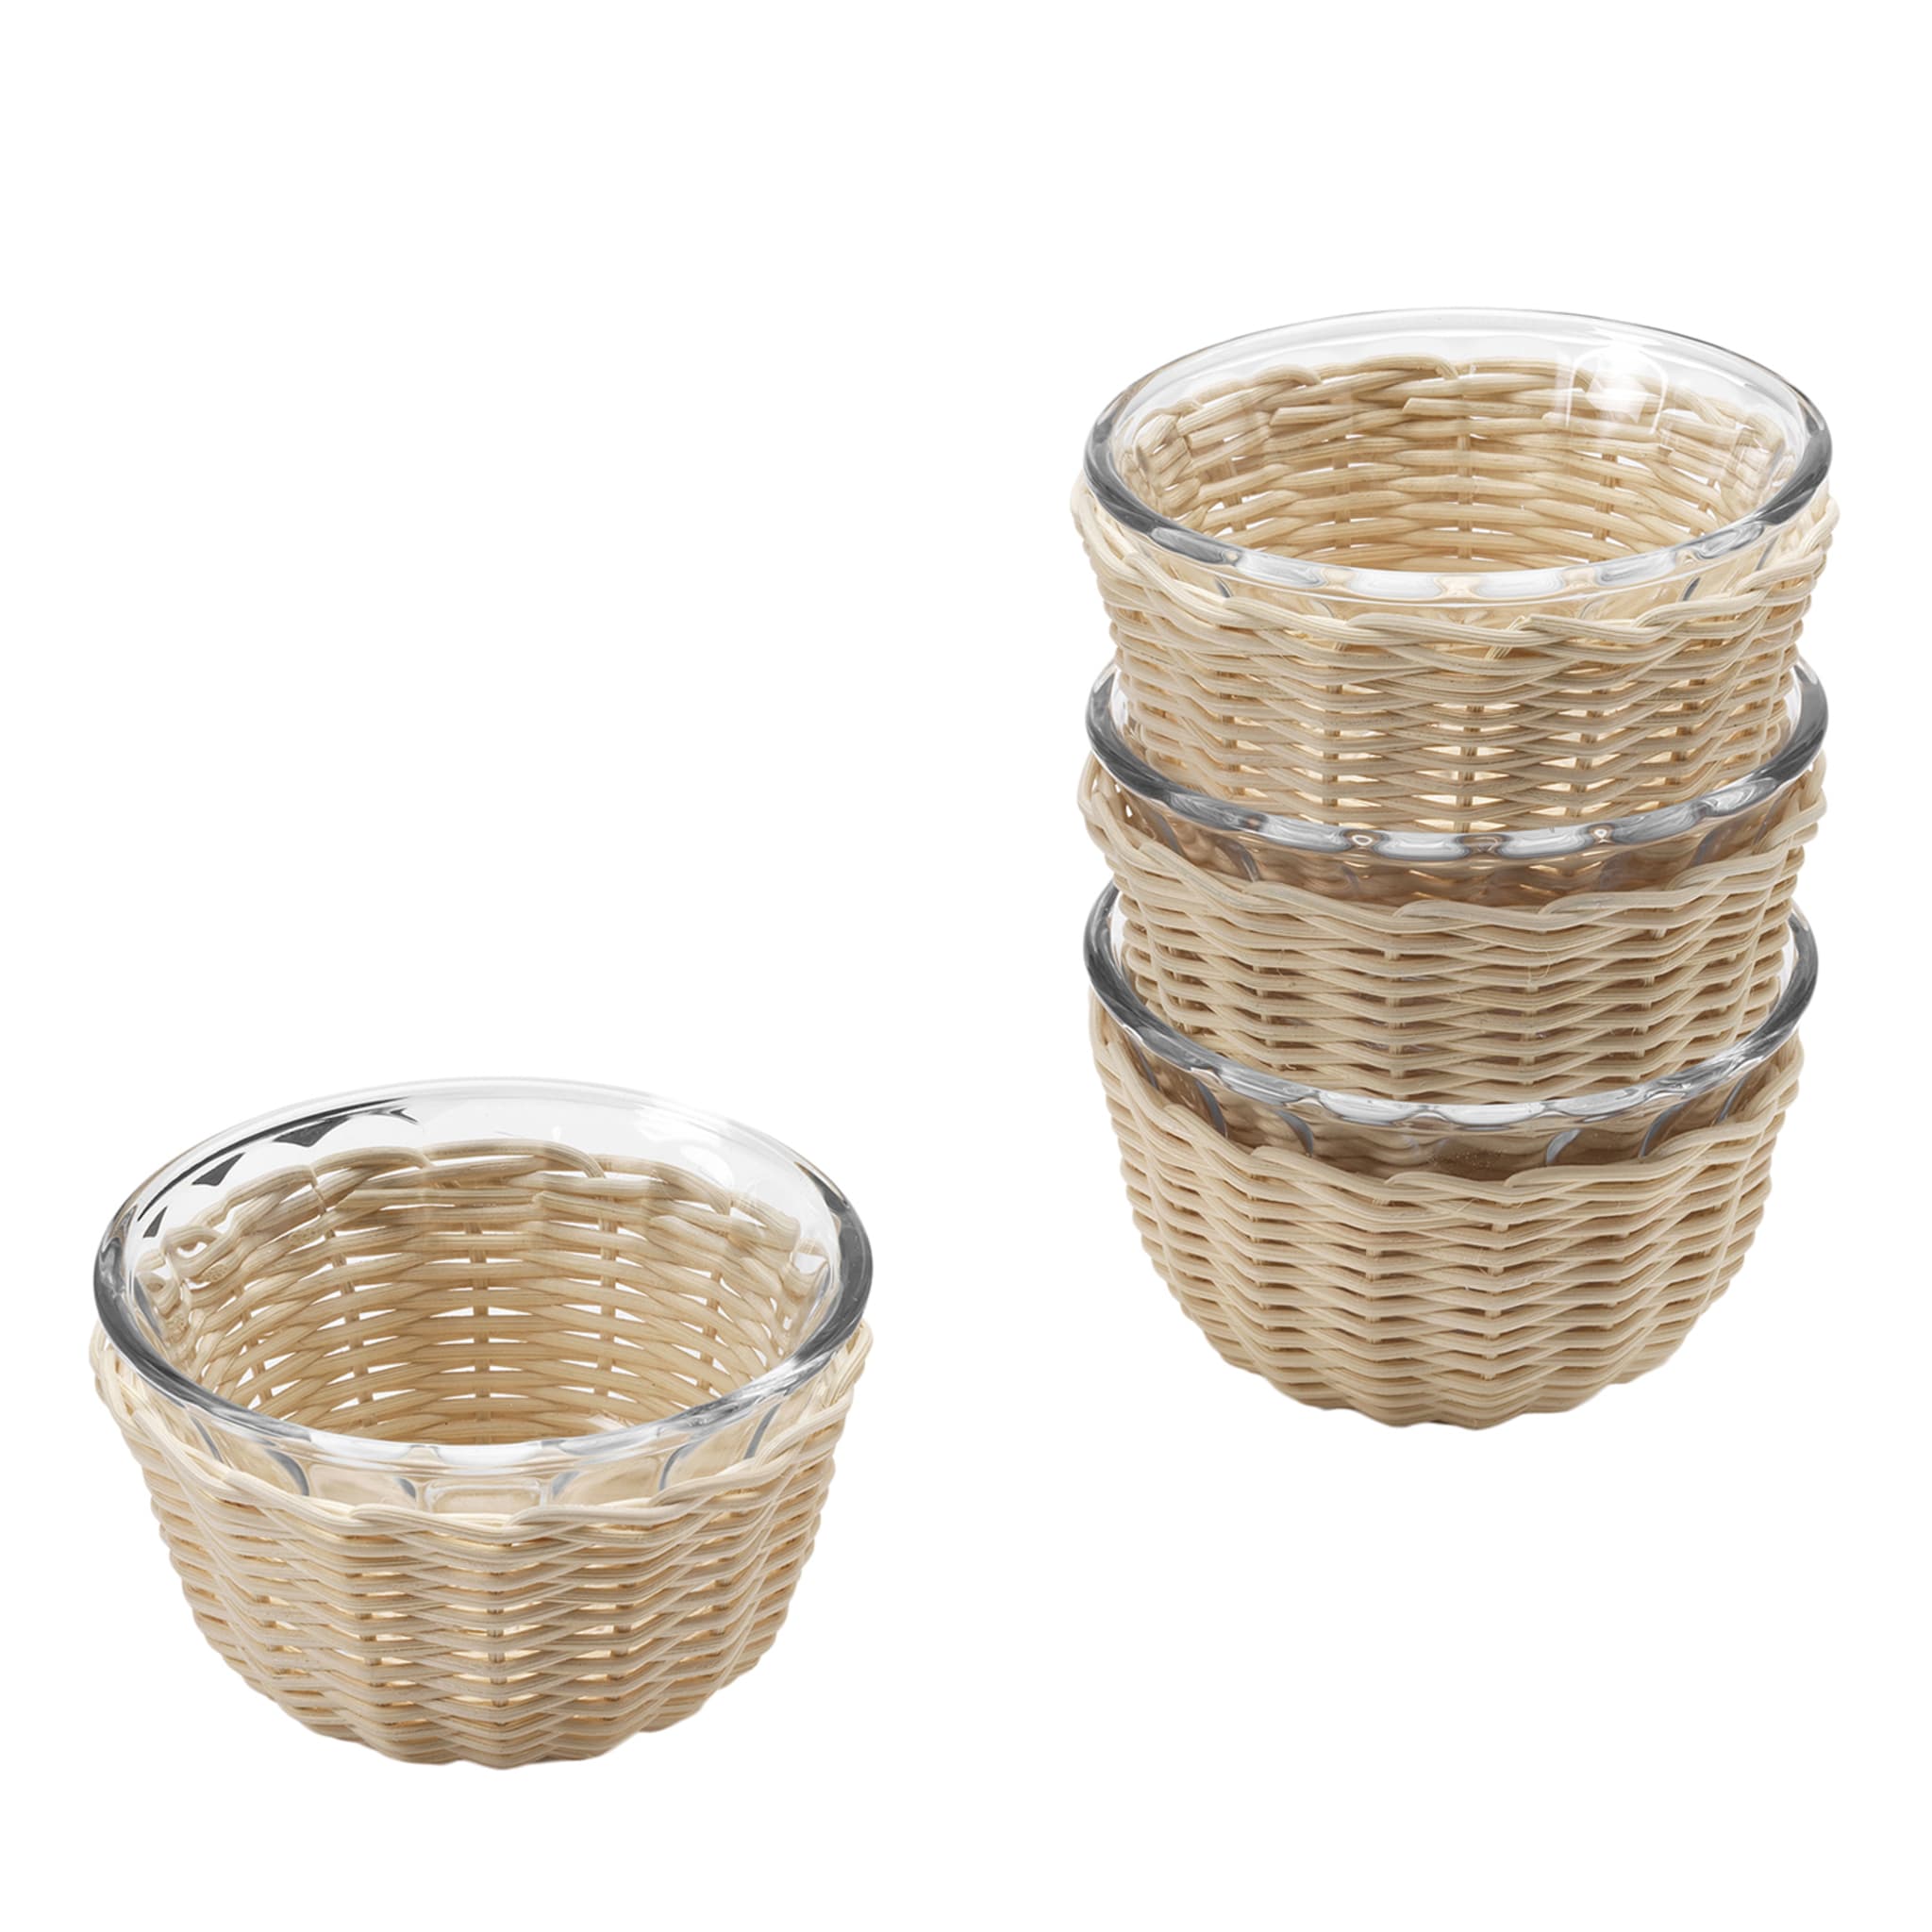 Campanula Cup with Wicker Basket - Alternative view 1